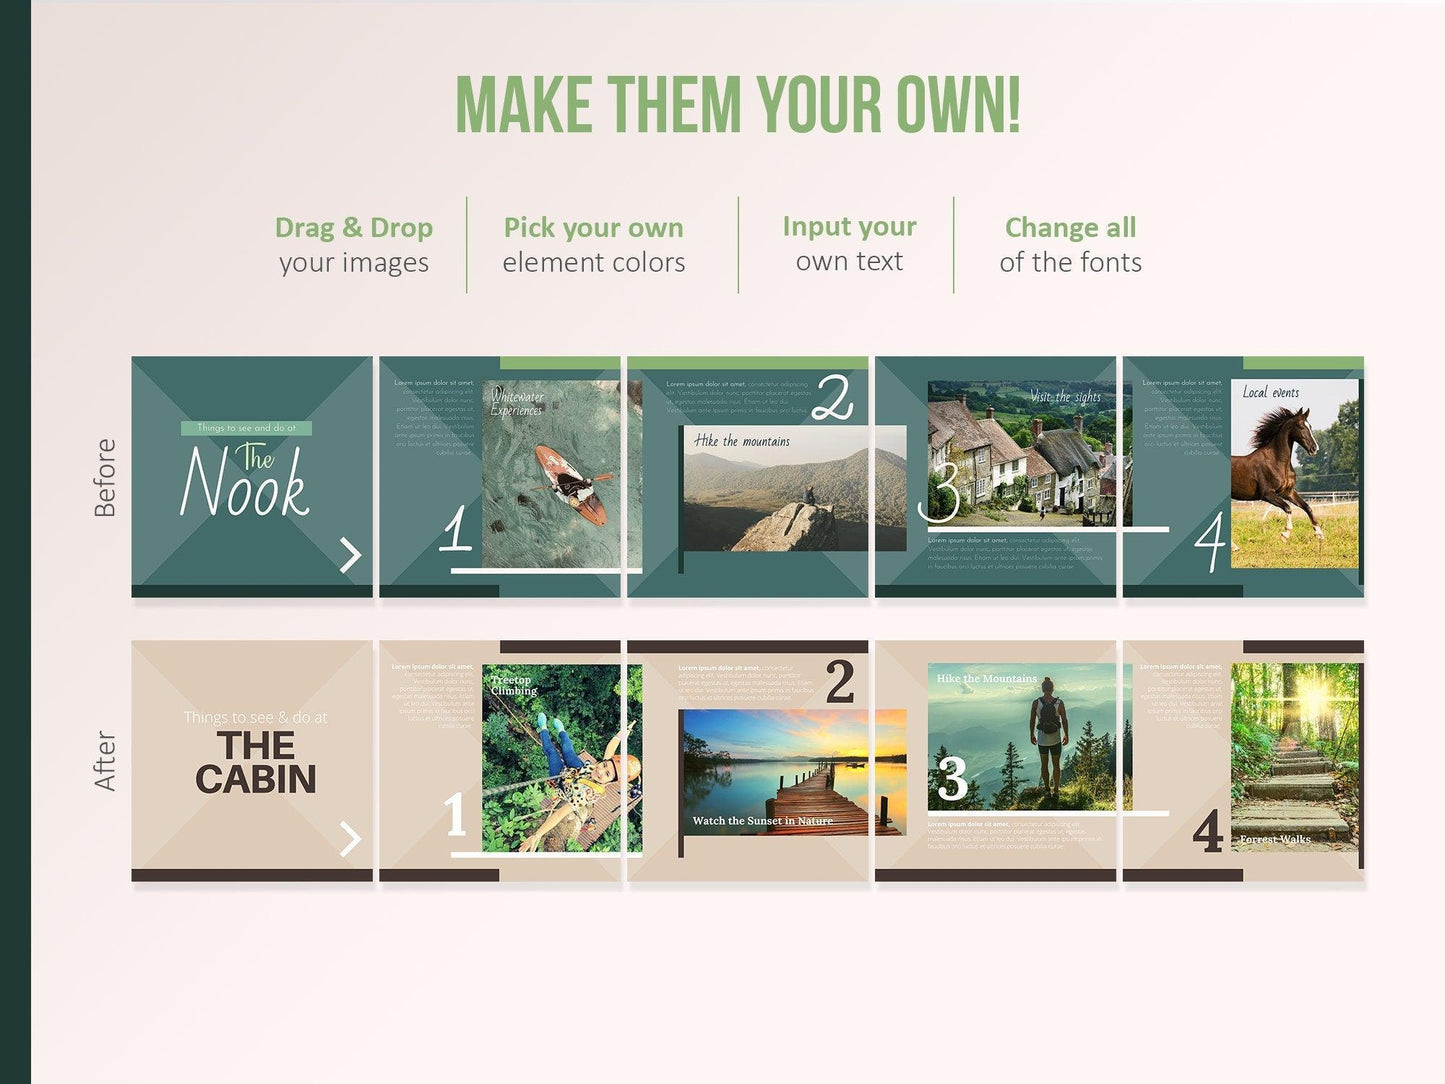 Airbnb Instagram Carousels PFor Social Media (country)